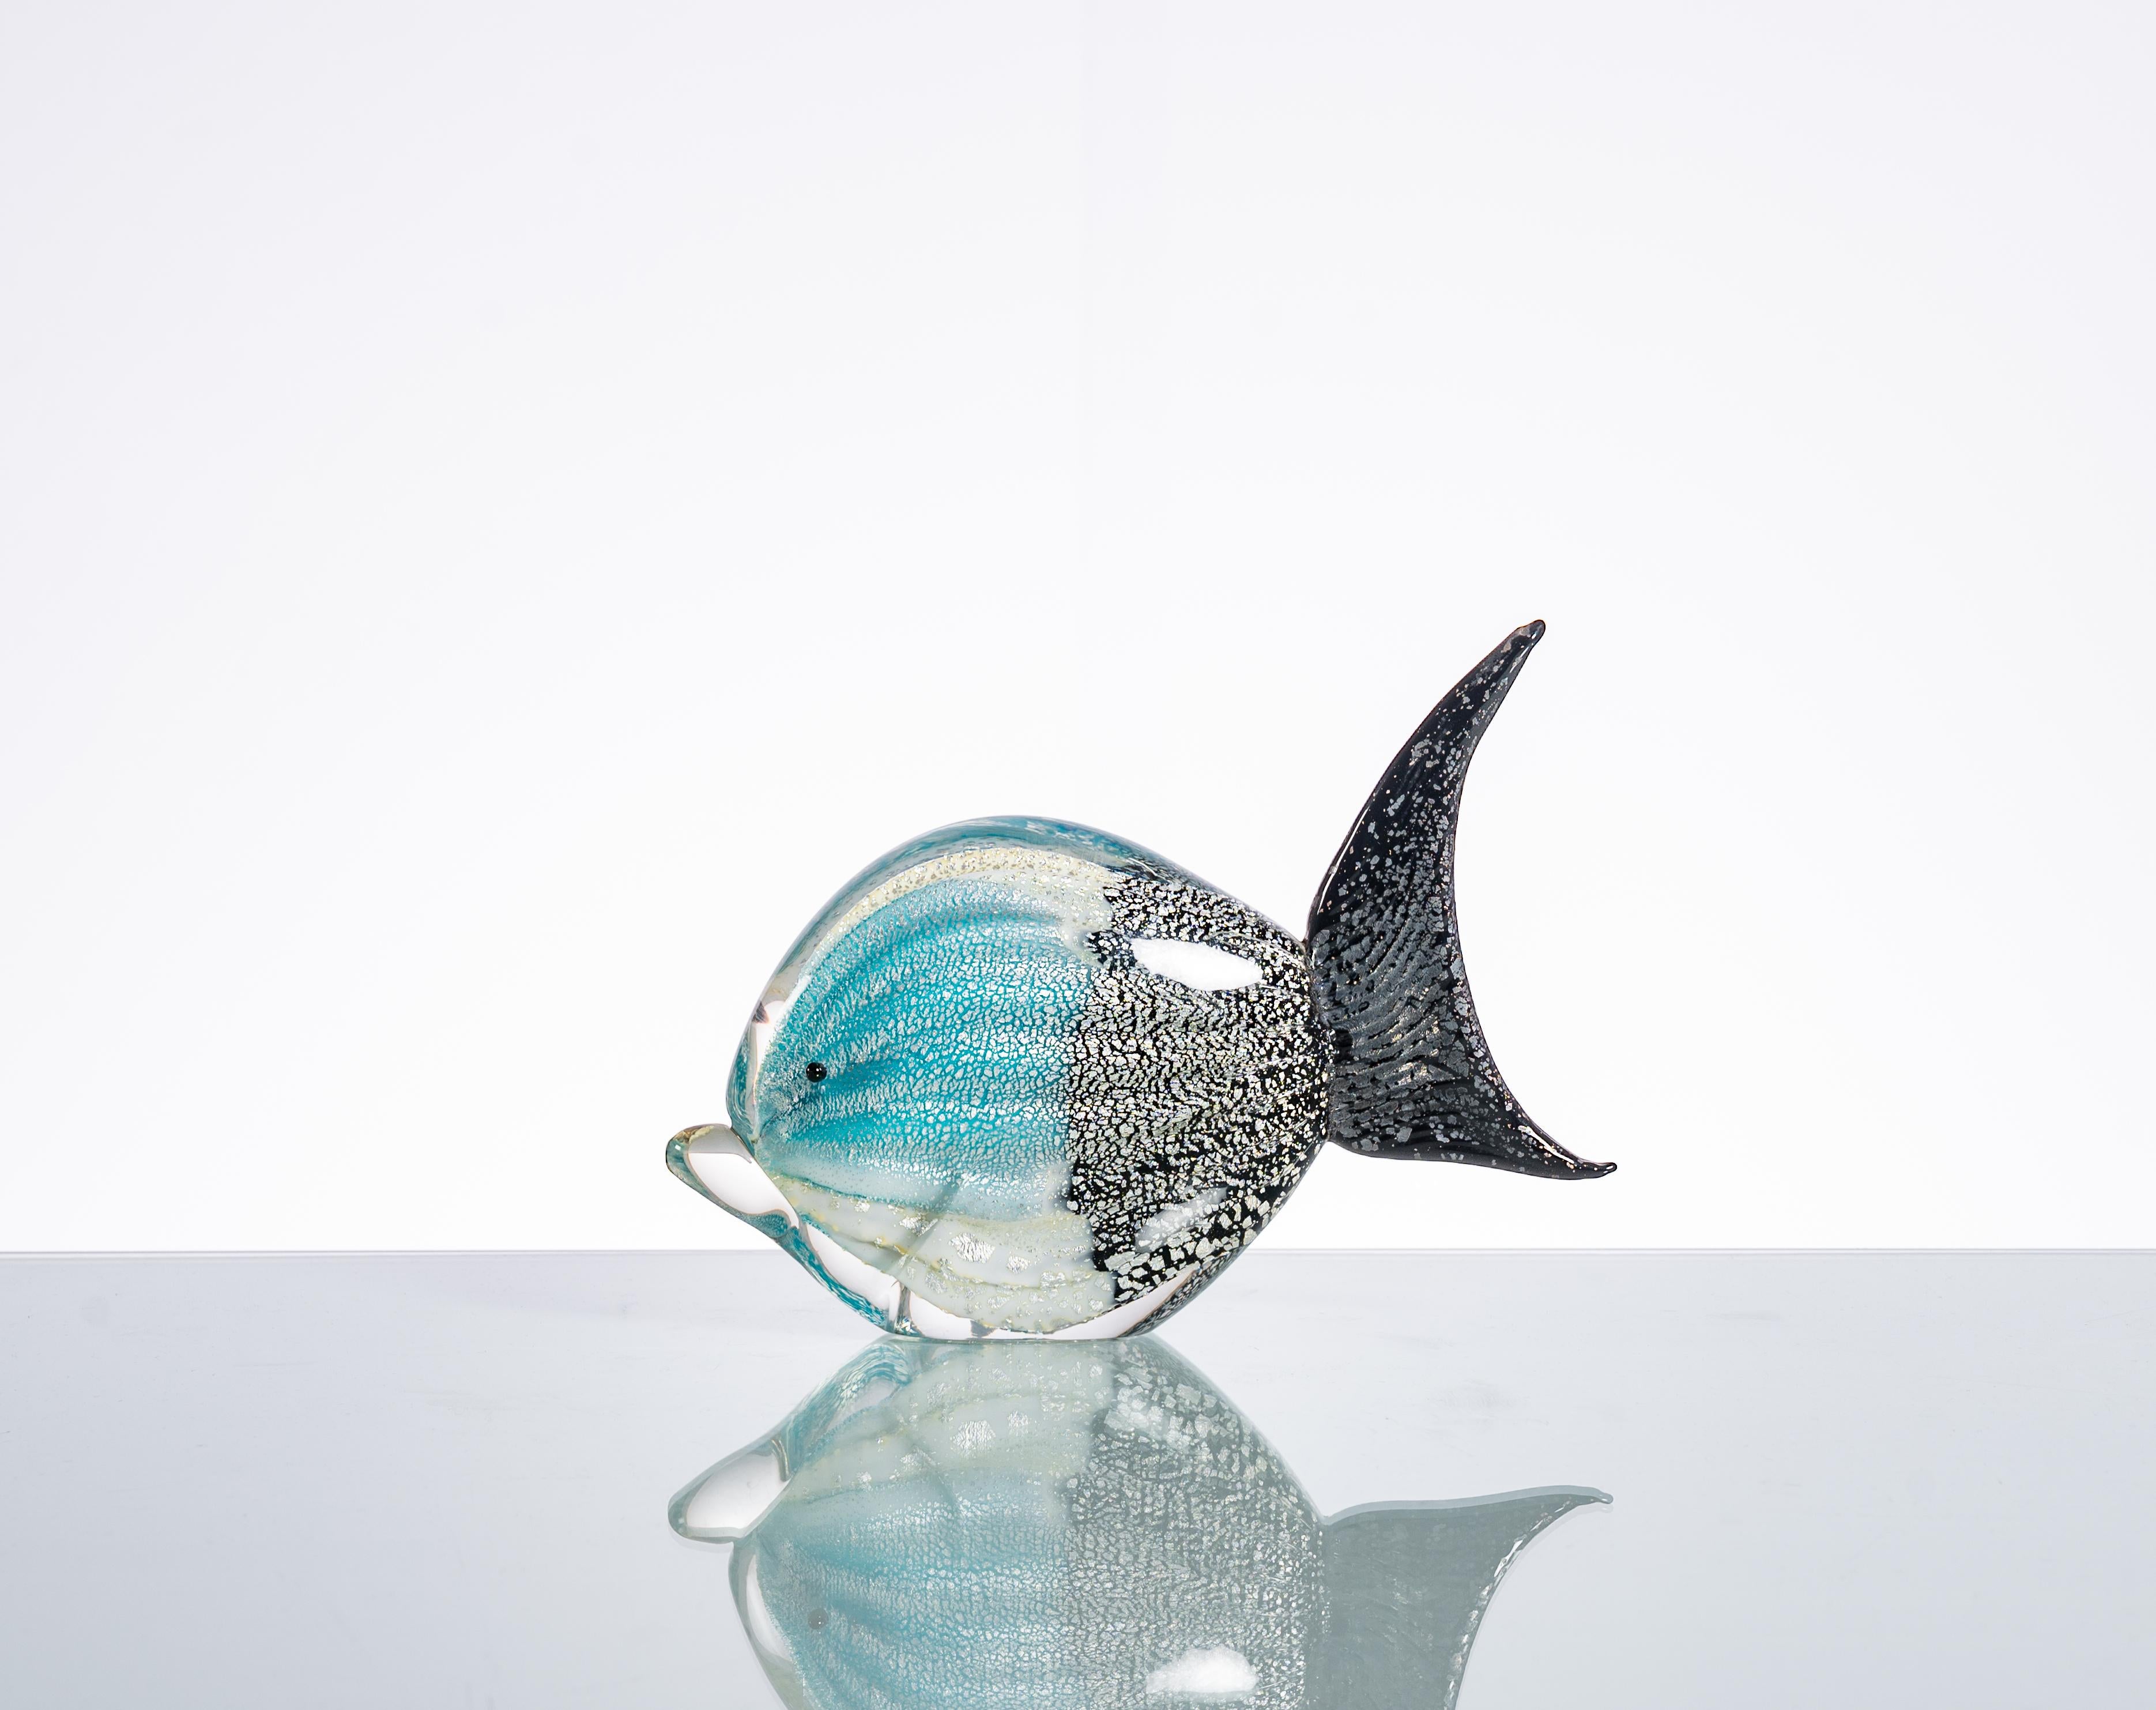 This Murano Glass Figure of a Tropical Fish is a stunning and iconic piece of art that embodies the artistic spirit of the era. Murano glass, hailing from the famous glassblowing island of Murano in Venice, Italy, is renowned for its exquisite